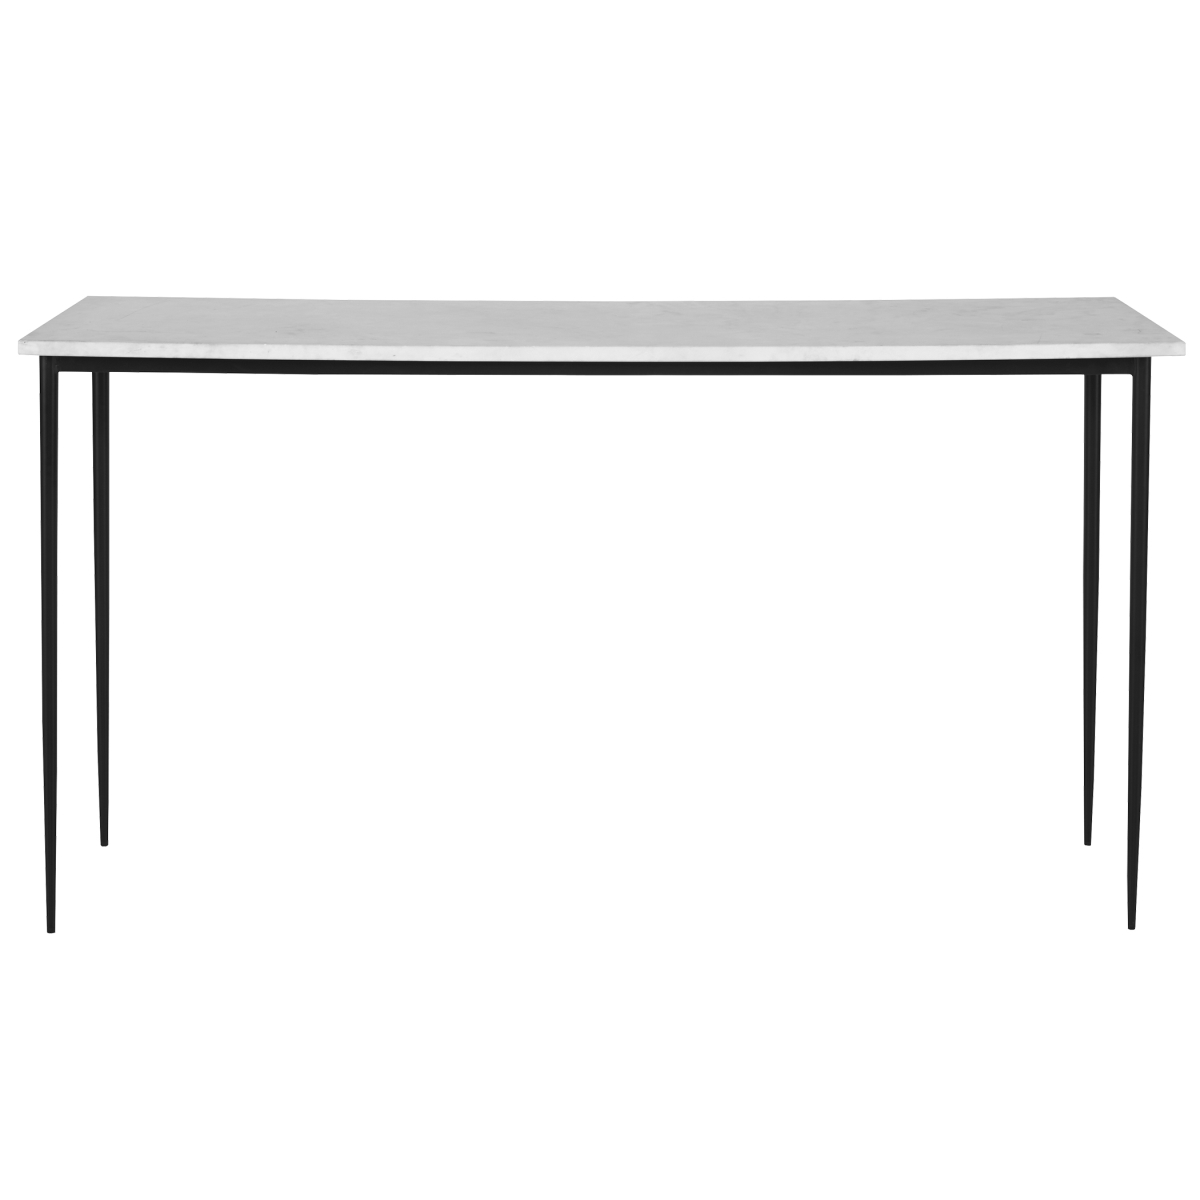 25173 Nightfall Marble Console Table, White -  Uttermost